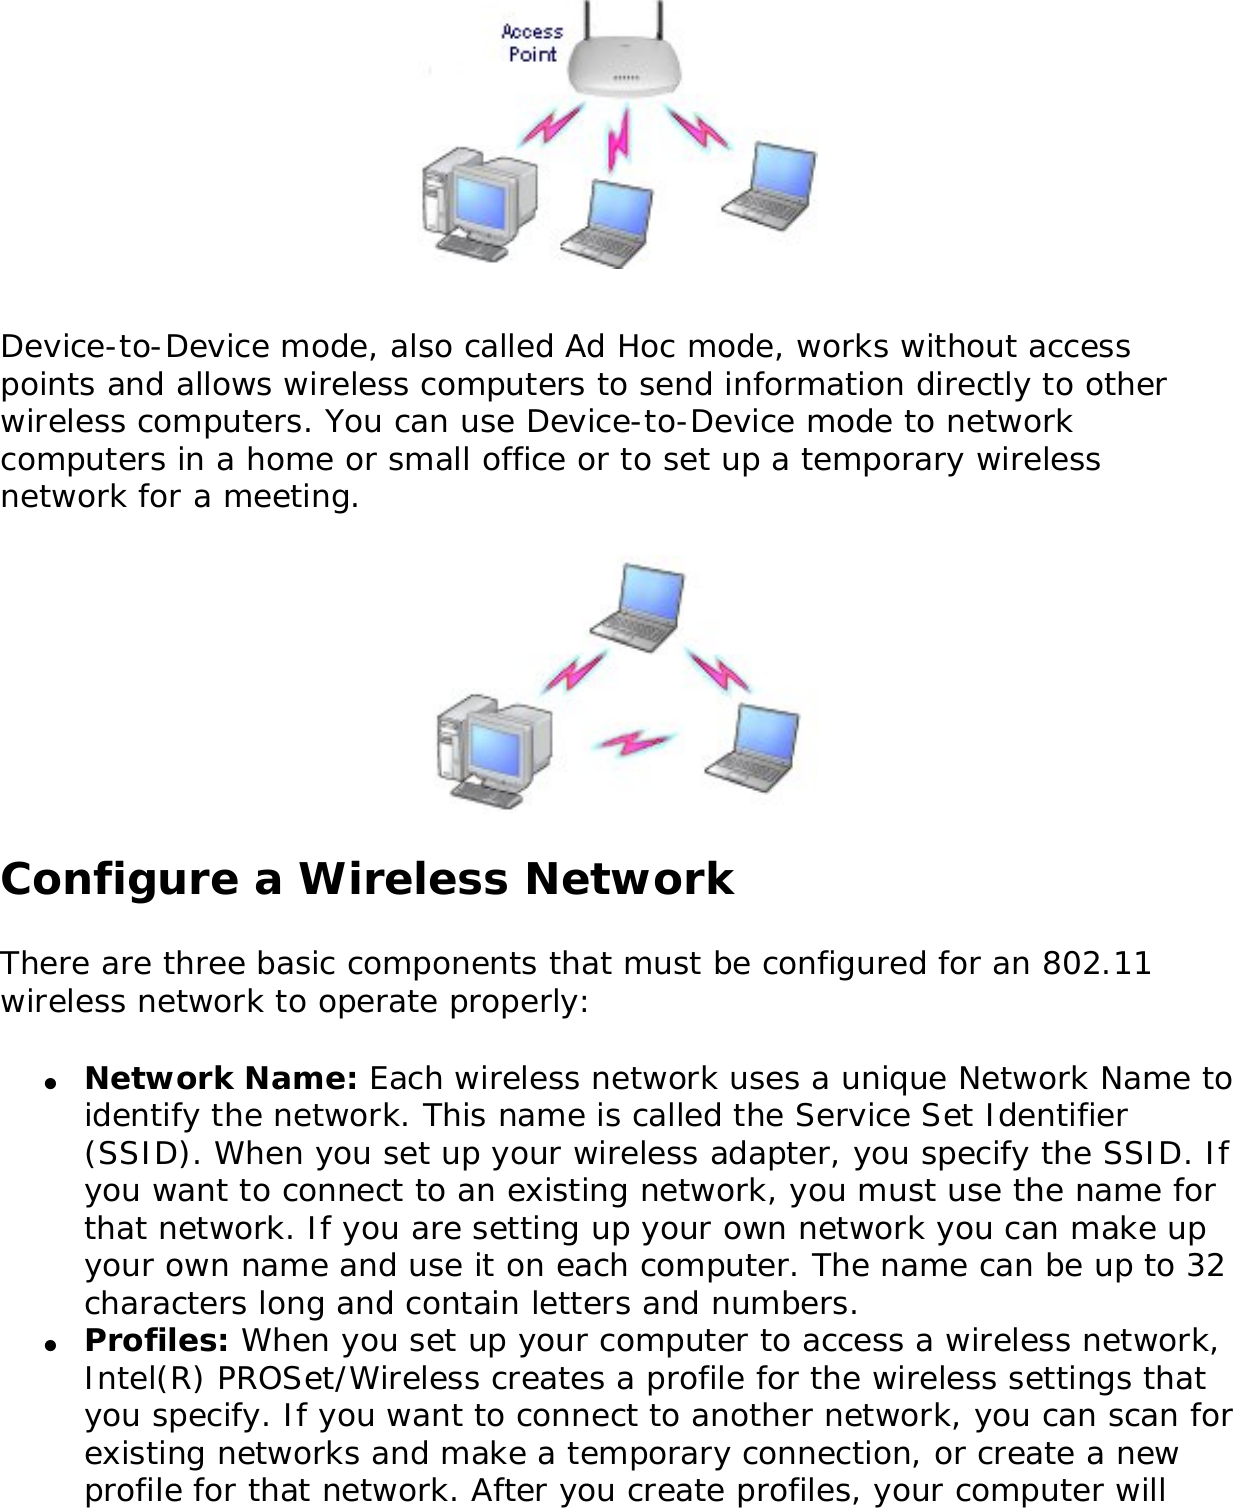 Device-to-Device mode, also called Ad Hoc mode, works without access points and allows wireless computers to send information directly to other wireless computers. You can use Device-to-Device mode to network computers in a home or small office or to set up a temporary wireless network for a meeting. Configure a Wireless NetworkThere are three basic components that must be configured for an 802.11 wireless network to operate properly: ●     Network Name: Each wireless network uses a unique Network Name to identify the network. This name is called the Service Set Identifier (SSID). When you set up your wireless adapter, you specify the SSID. If you want to connect to an existing network, you must use the name for that network. If you are setting up your own network you can make up your own name and use it on each computer. The name can be up to 32 characters long and contain letters and numbers.●     Profiles: When you set up your computer to access a wireless network, Intel(R) PROSet/Wireless creates a profile for the wireless settings that you specify. If you want to connect to another network, you can scan for existing networks and make a temporary connection, or create a new profile for that network. After you create profiles, your computer will 